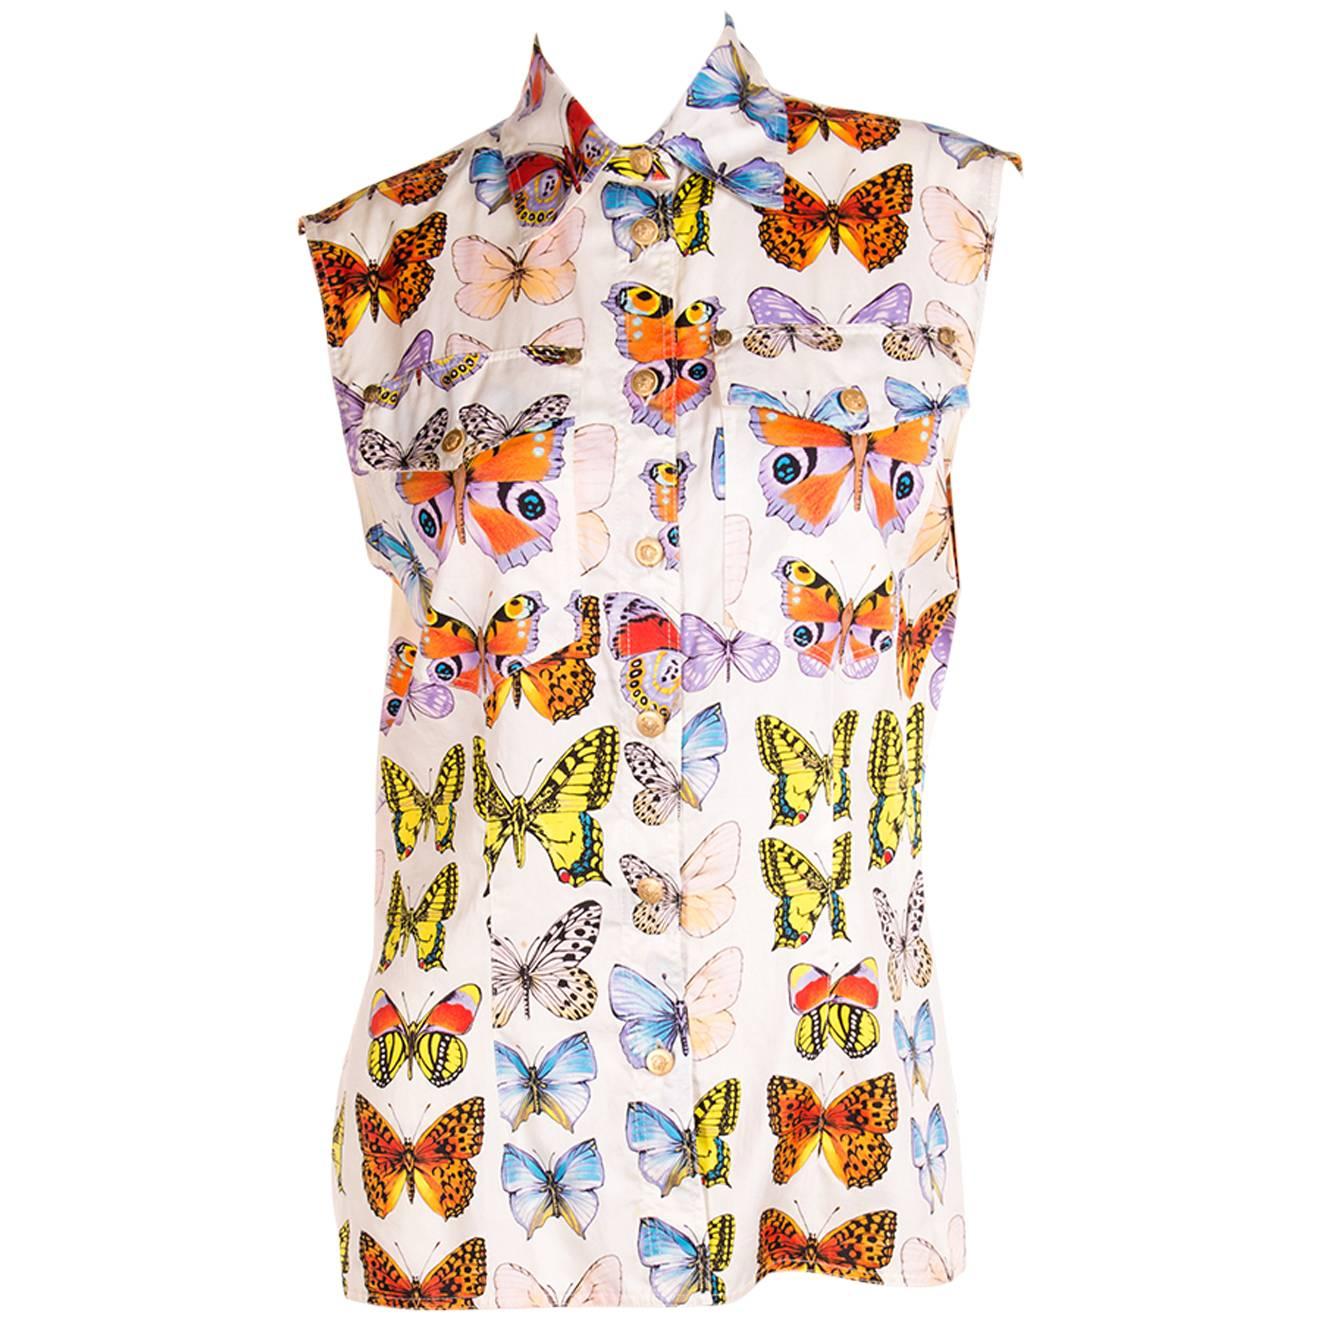 Gianni Versace S/S 1995 Butterfly Print Top